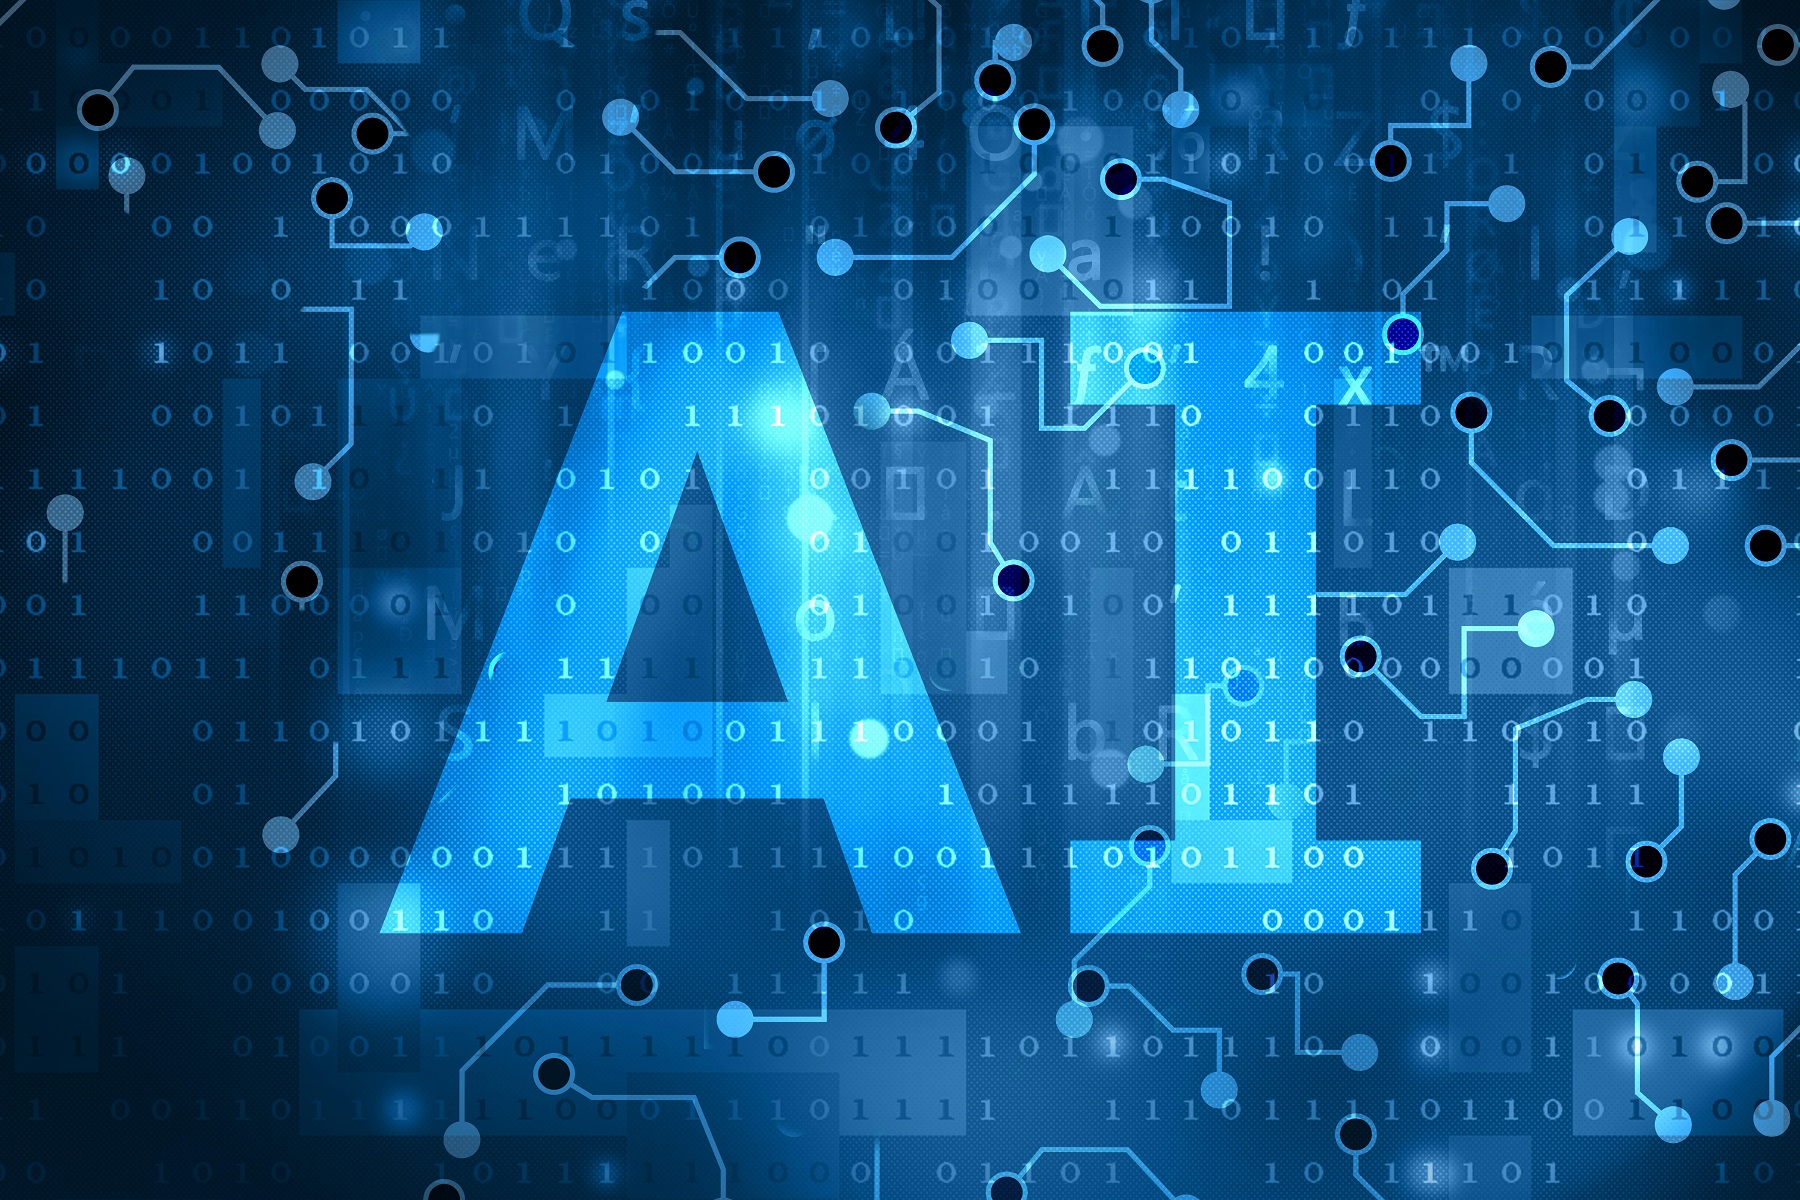 From Dark Reading – 8 Tips on Leveraging AI Tools Without Compromising Security